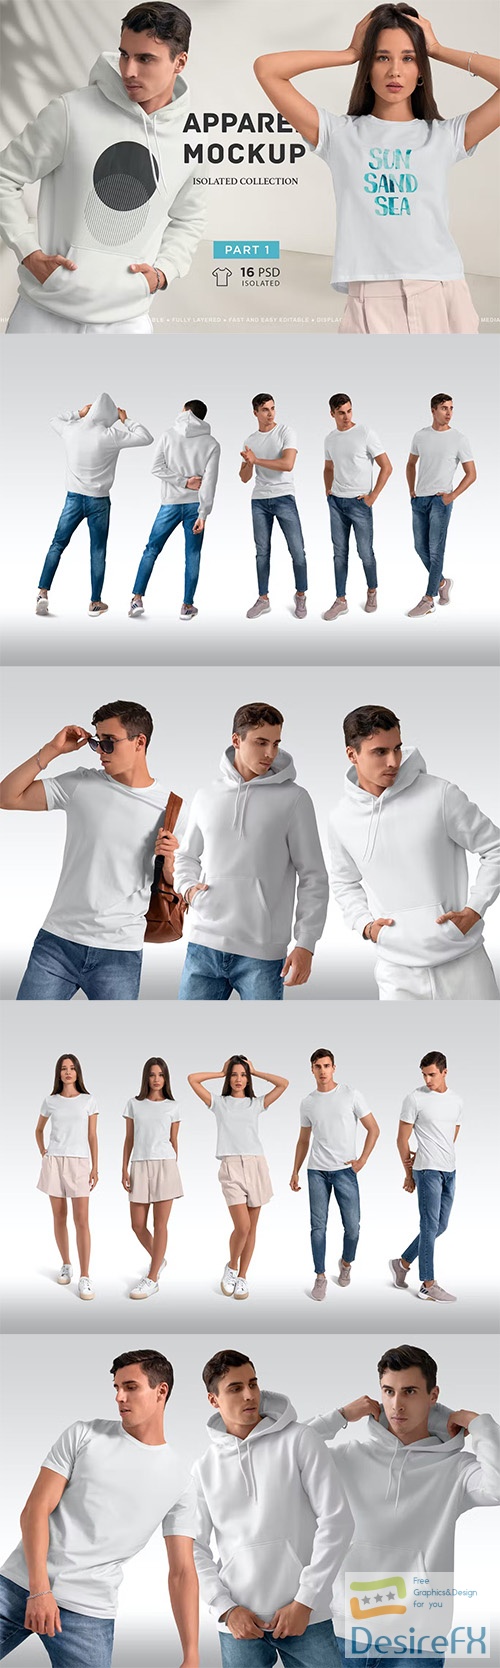 Isolated Apparel MockUps Collection Part 1 PSD